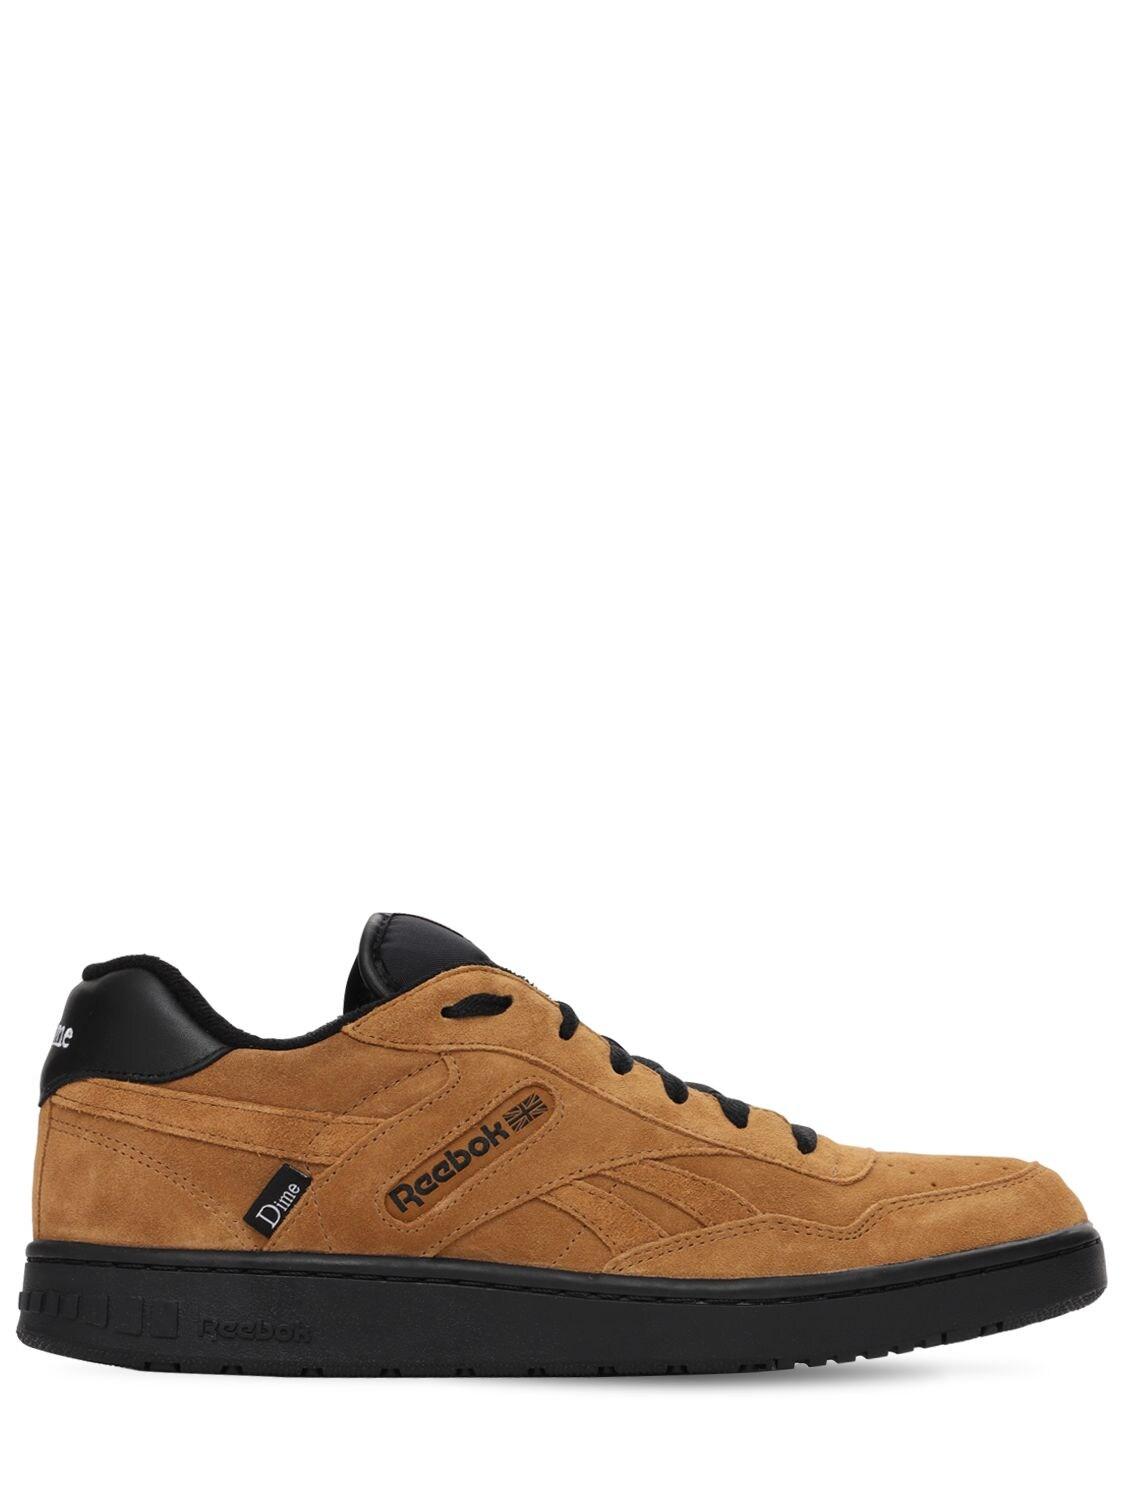 Reebok Leather Dime Bb4000 Sneakers in Brown for Men - Lyst